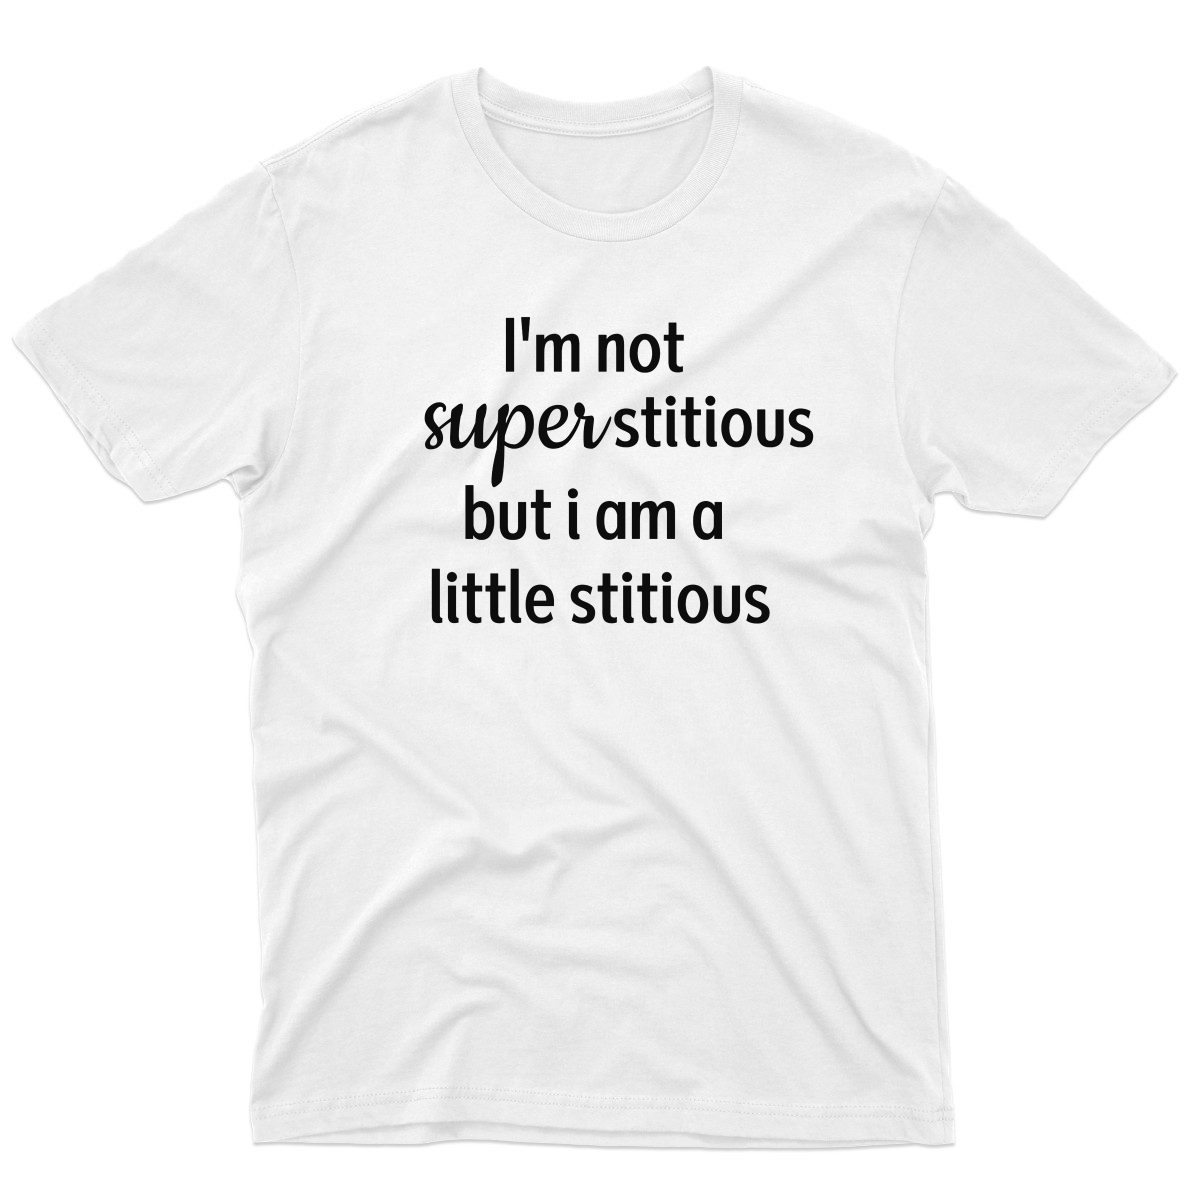 I'm Not Superstitious but I am a Little Stitious Men's T-shirt | White